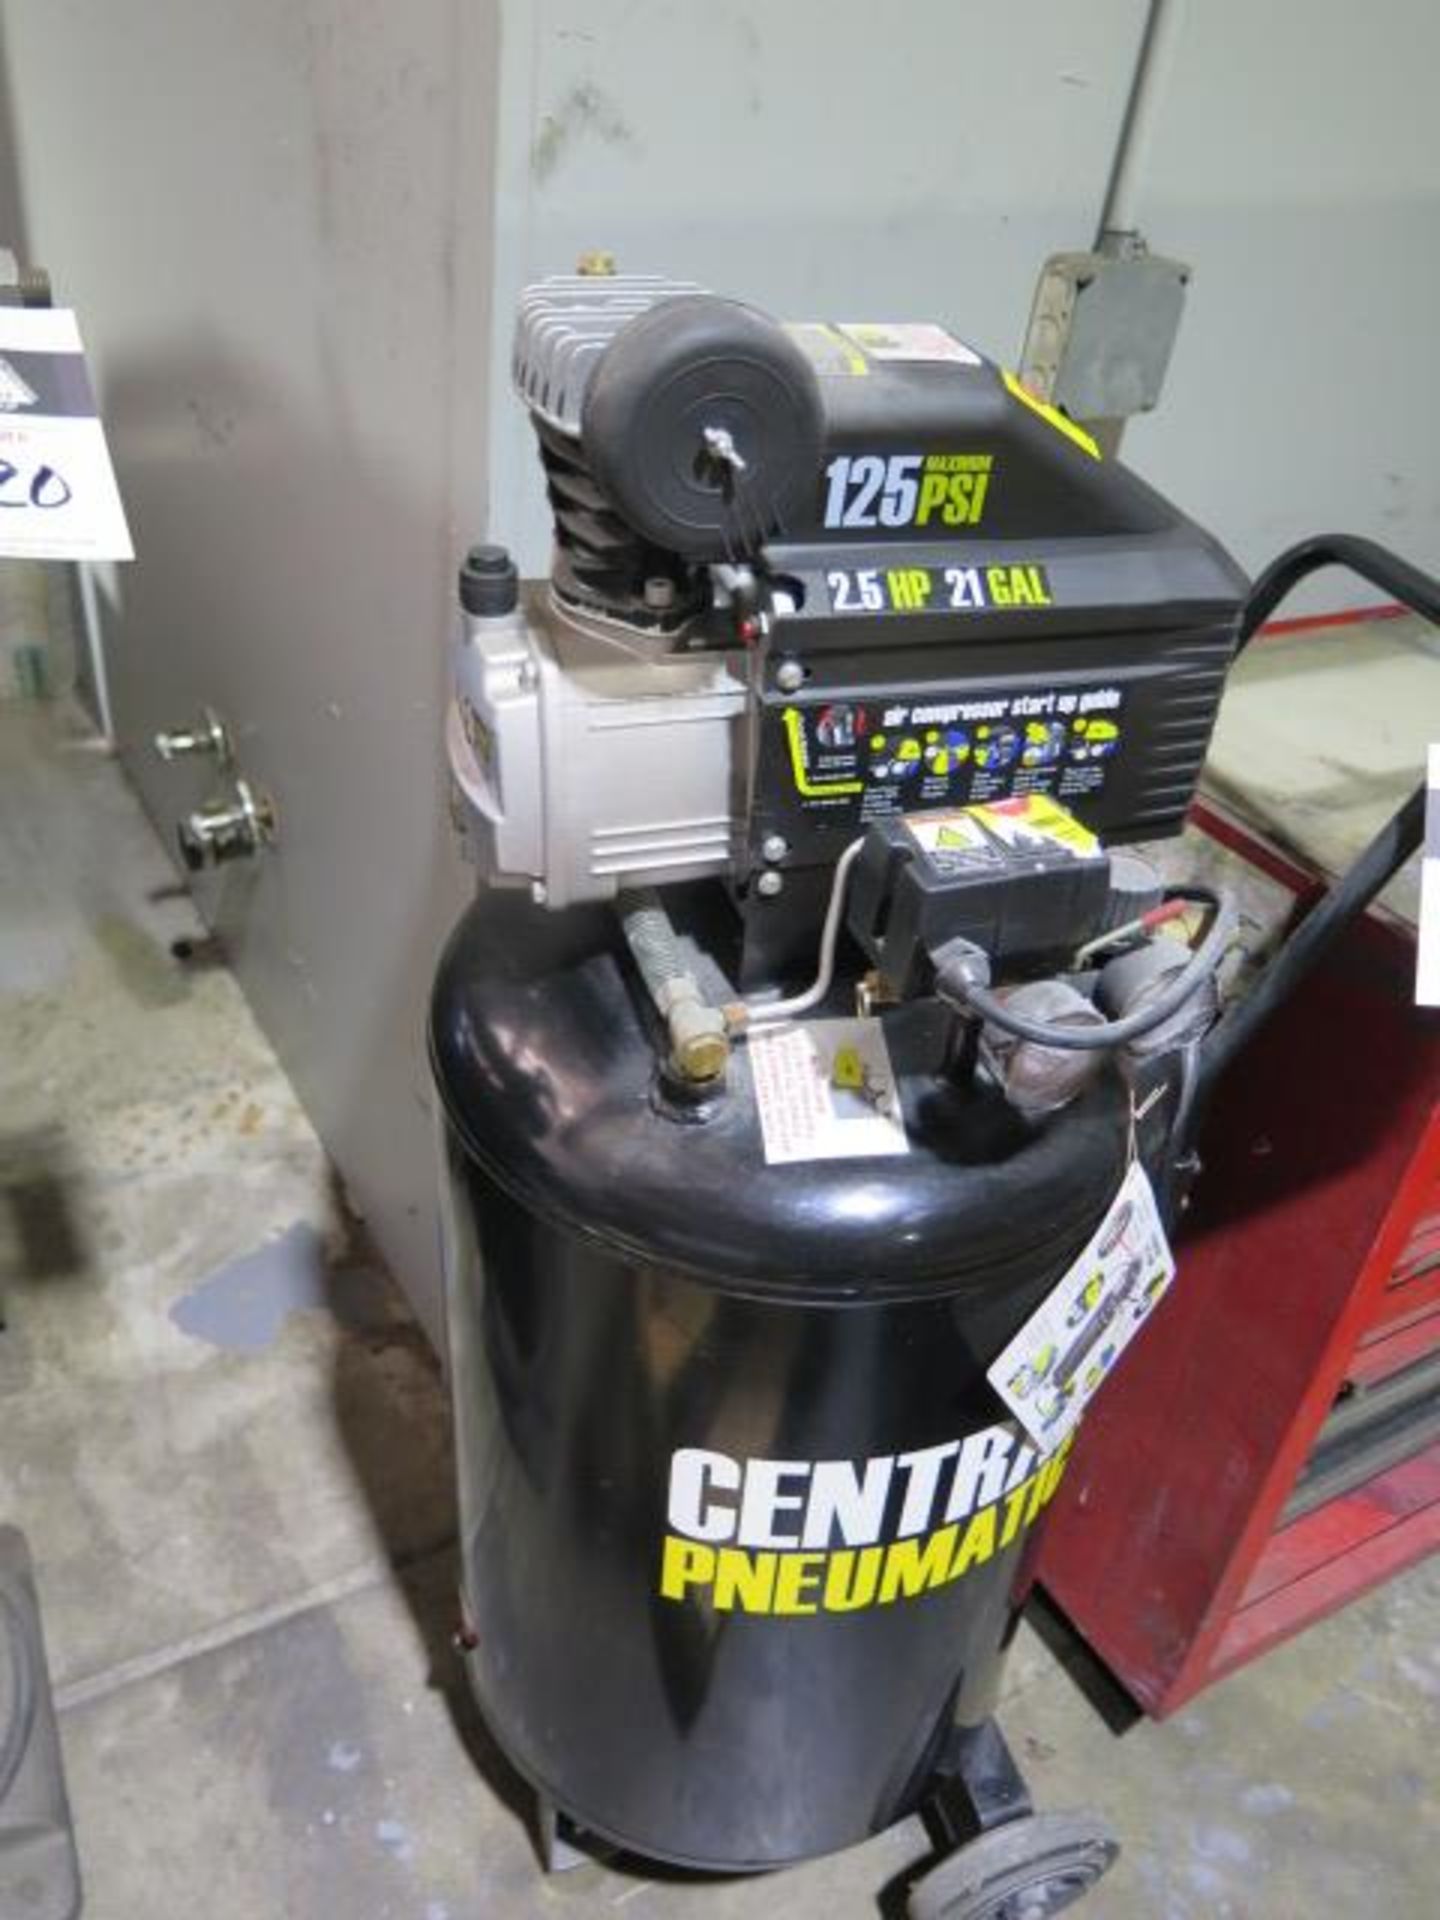 Central Pneumatic Portable 2.5Hp Air Compressor w/ 21 Gallon Tank (SOLD AS-IS - NO WARRANTY) - Image 2 of 5